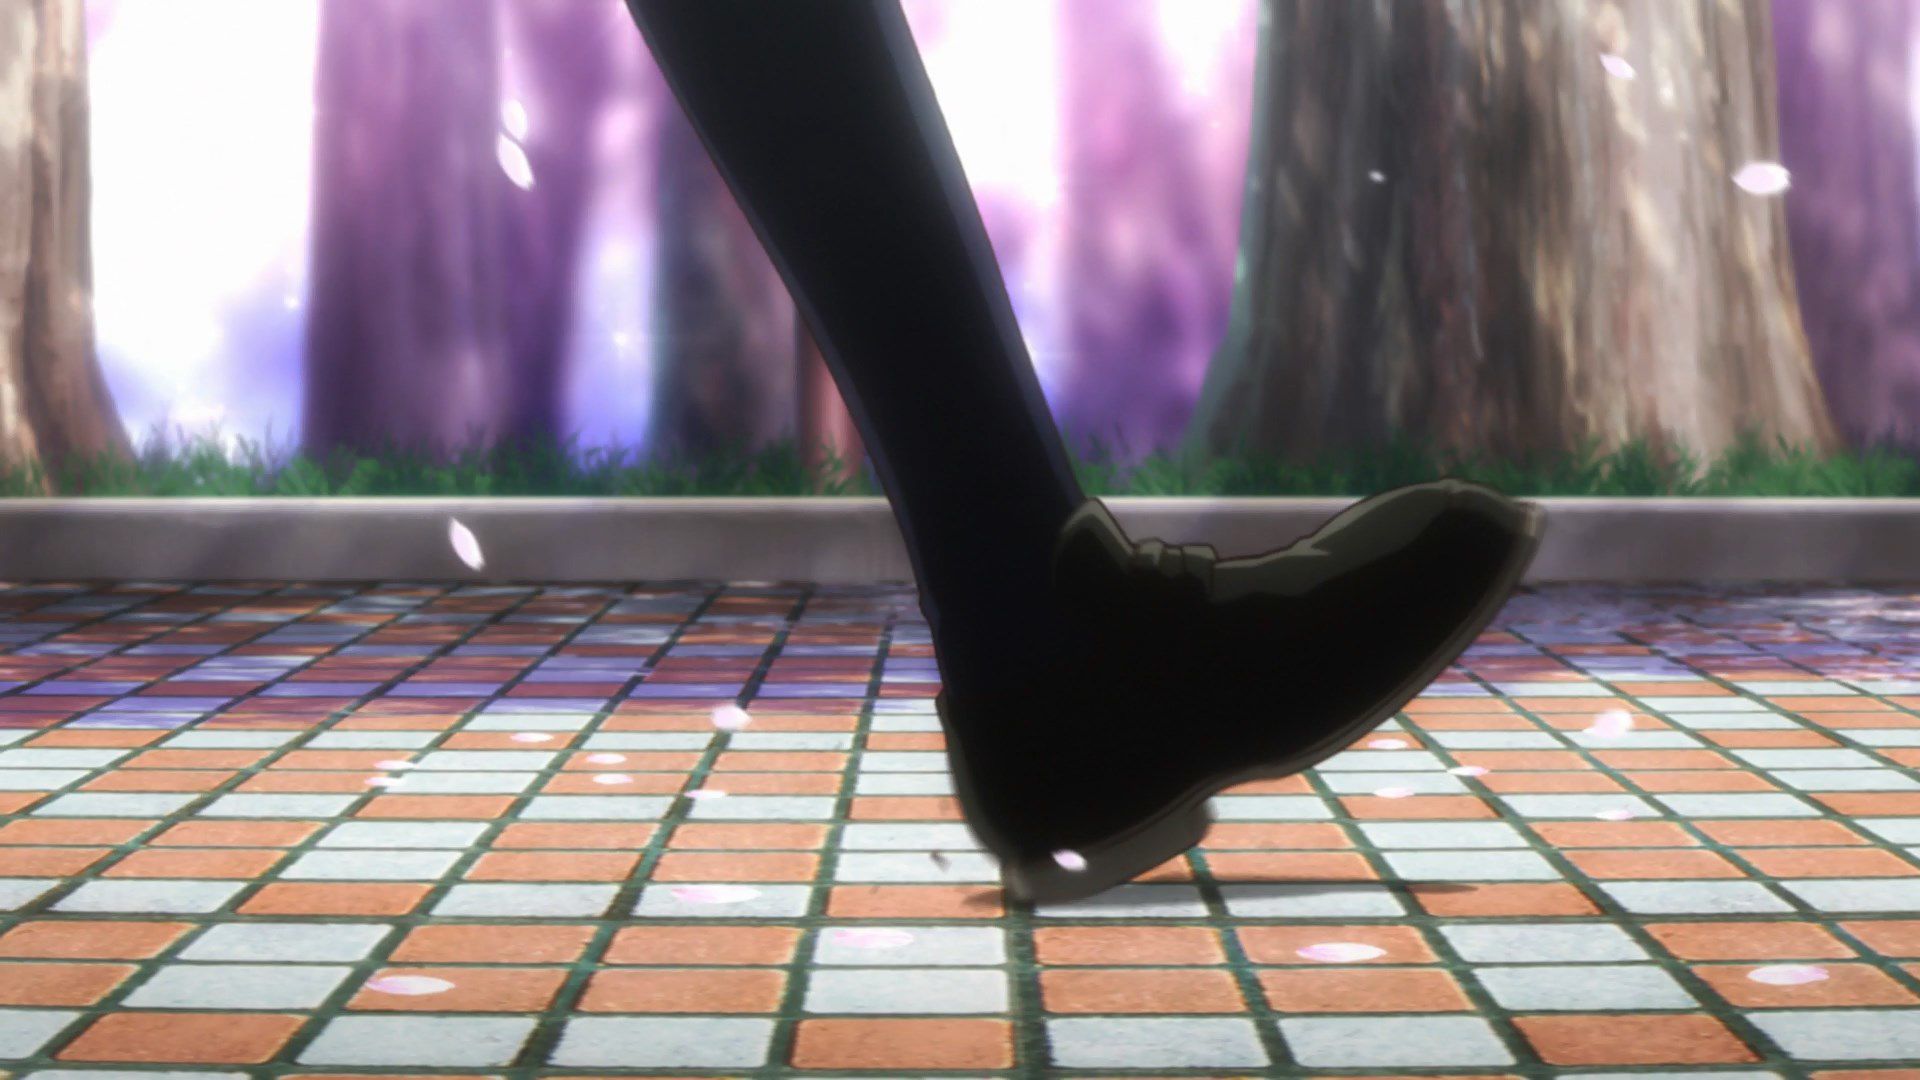 [God images] "love live! ' Μm ' PV's leg is too erotic everyone wakes up to a leg fetish of wwwww 29